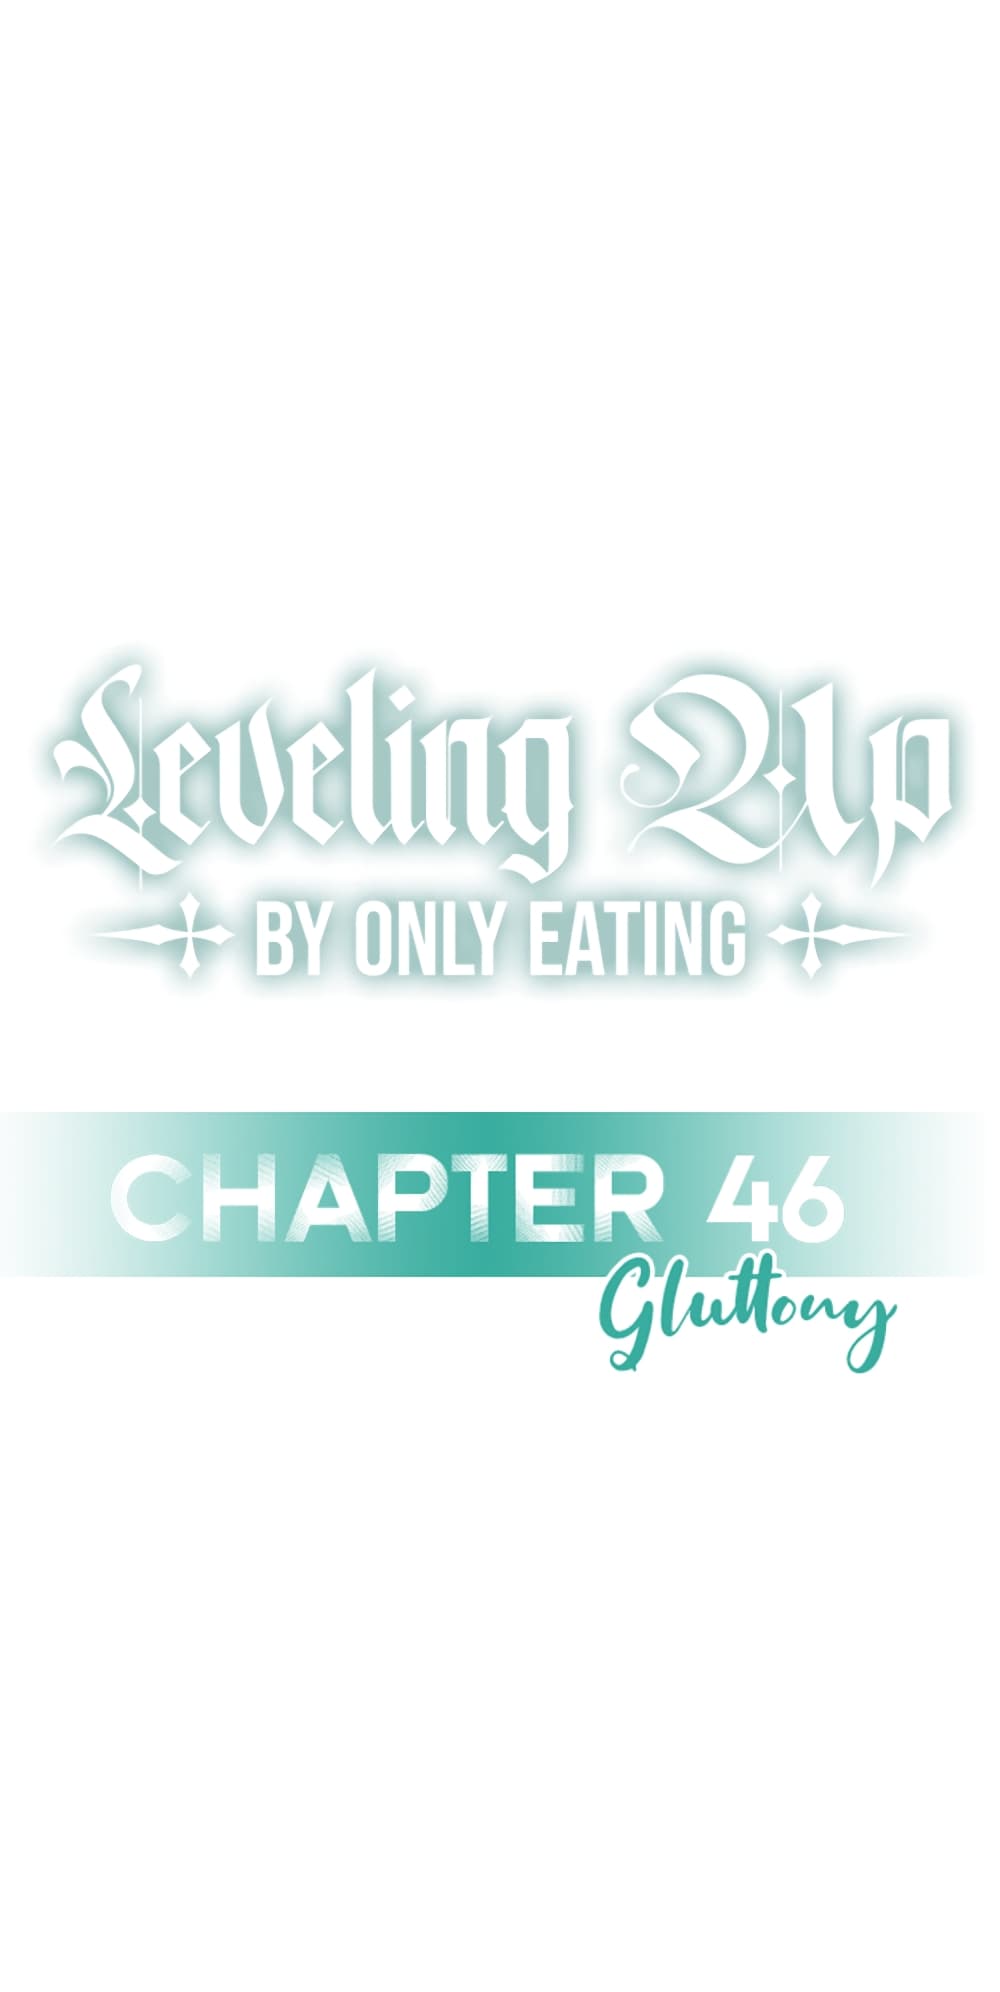 Leveling Up, By Only Eating! 46-46